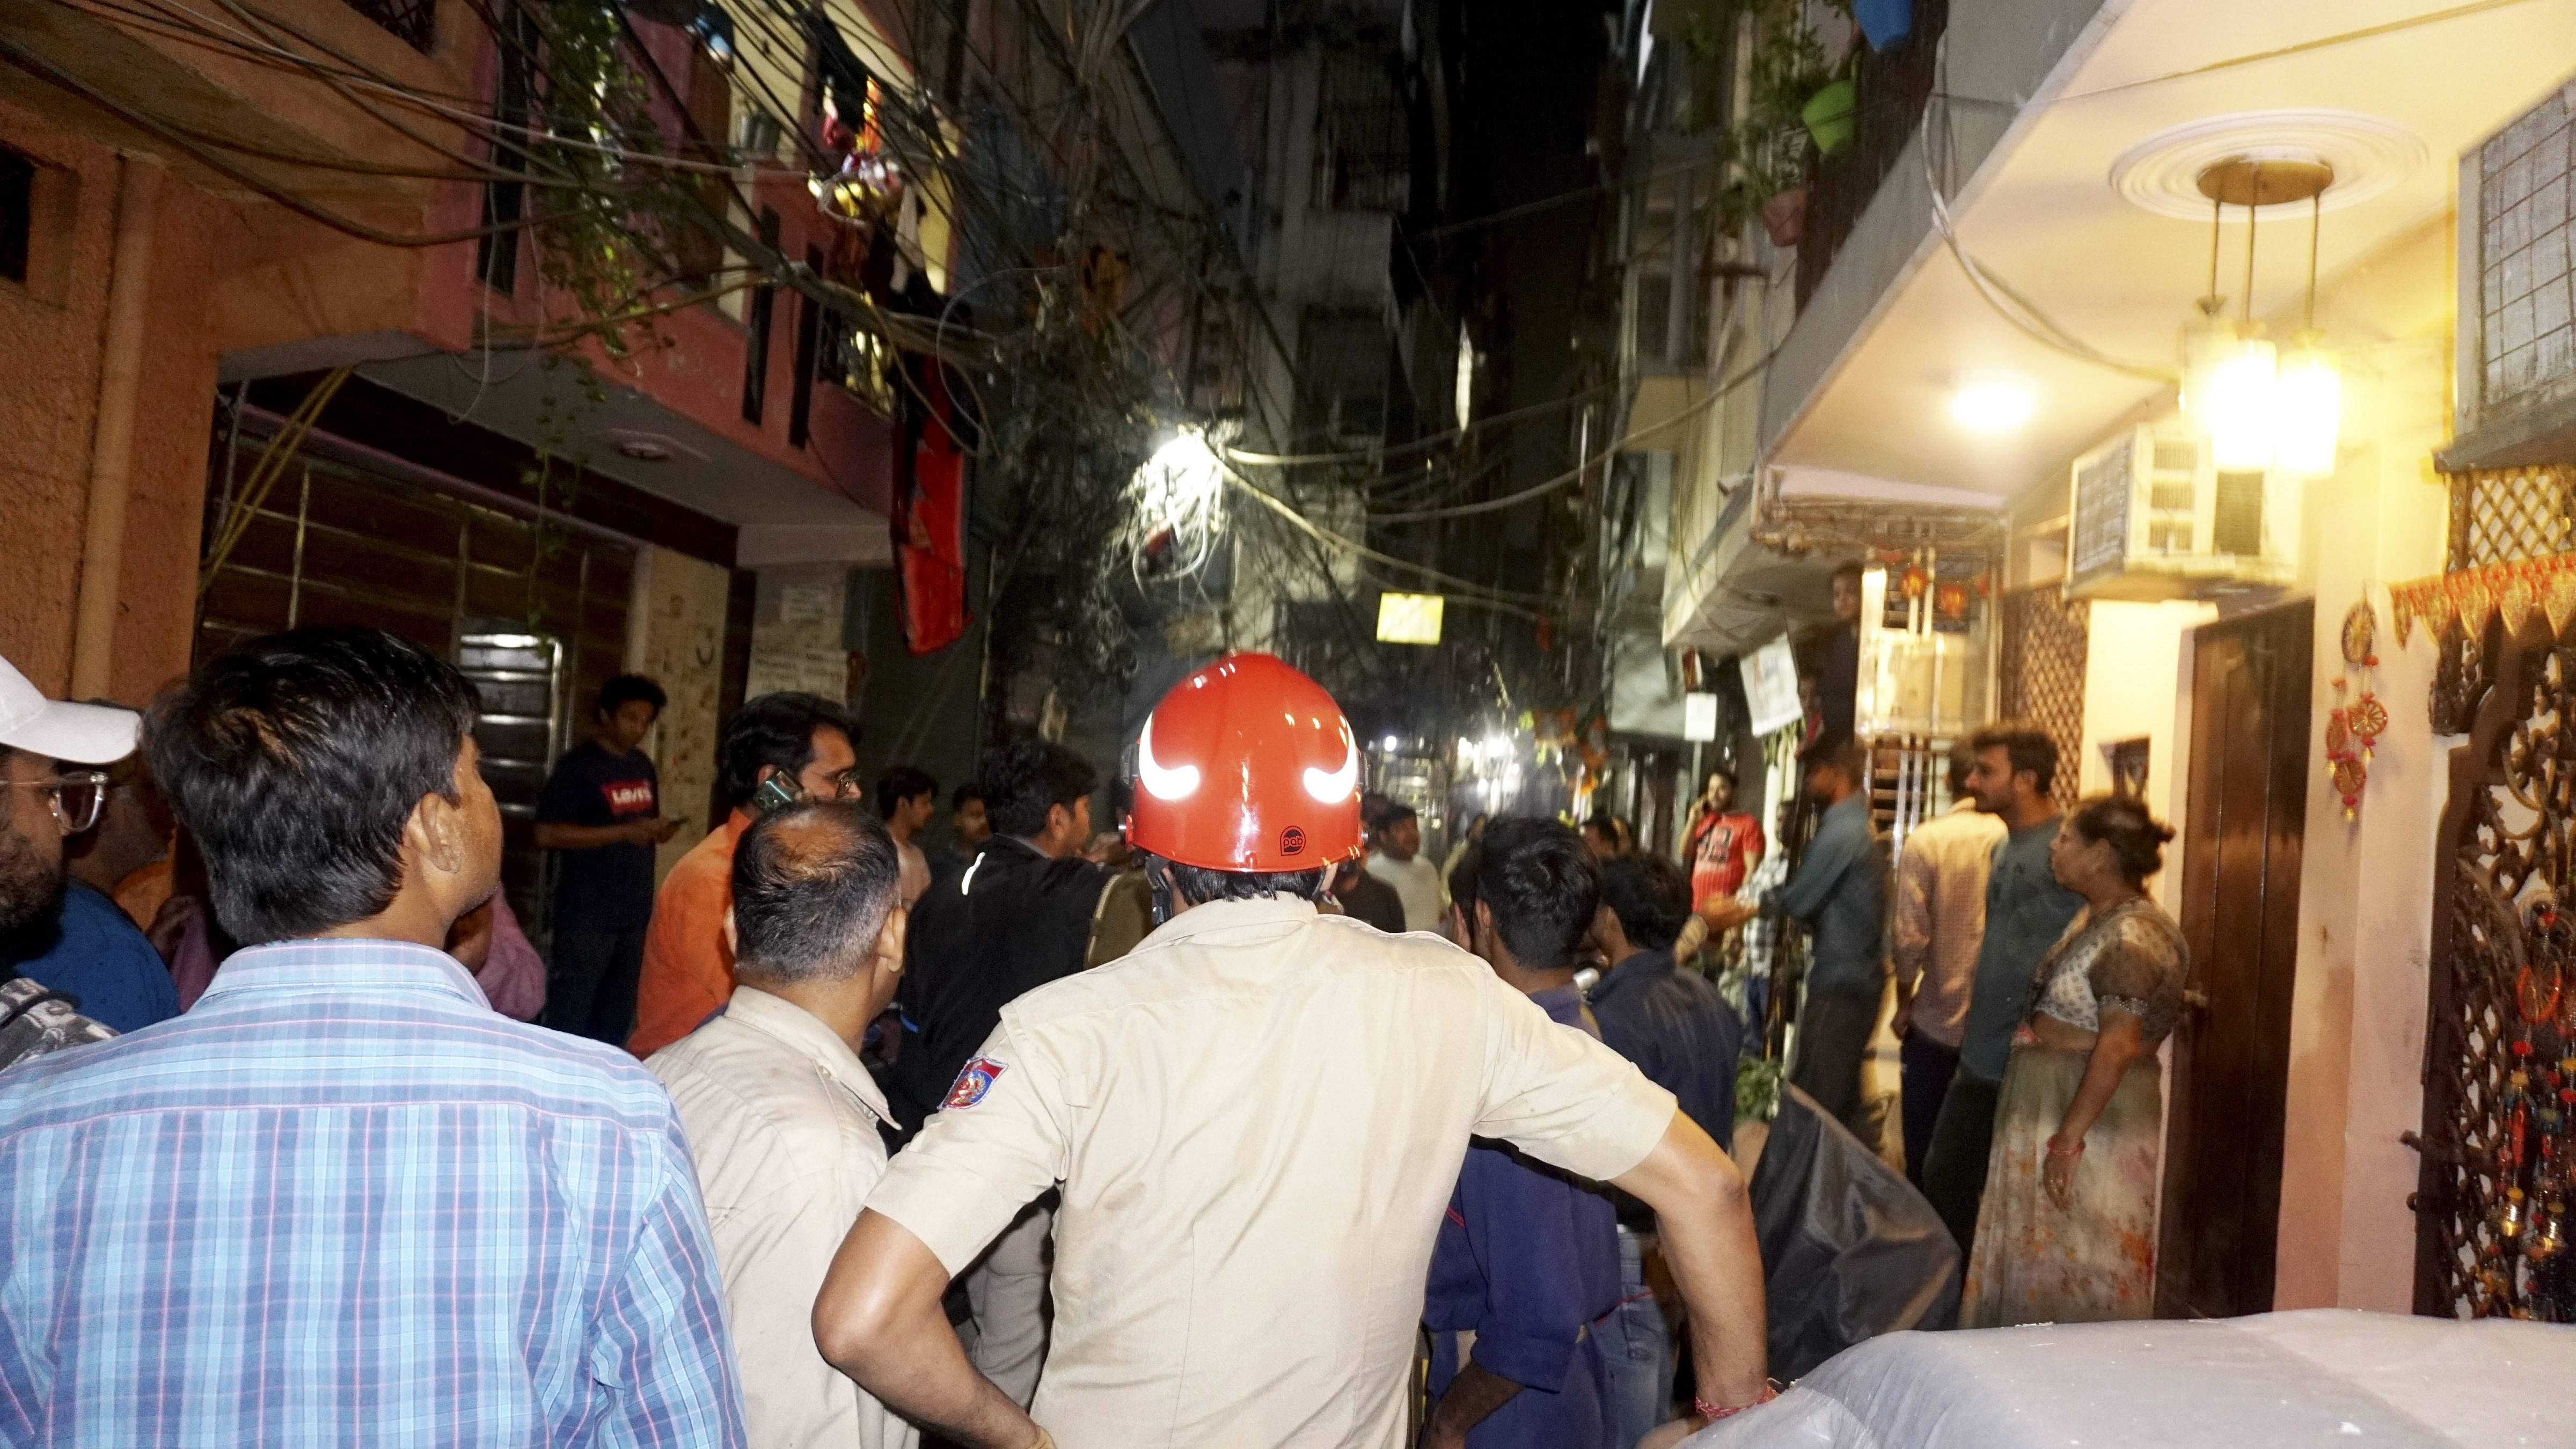 People gather after a building tilts folowing an earthquake, at Shakarpur area in New Delhi. Credit: PTI Photo